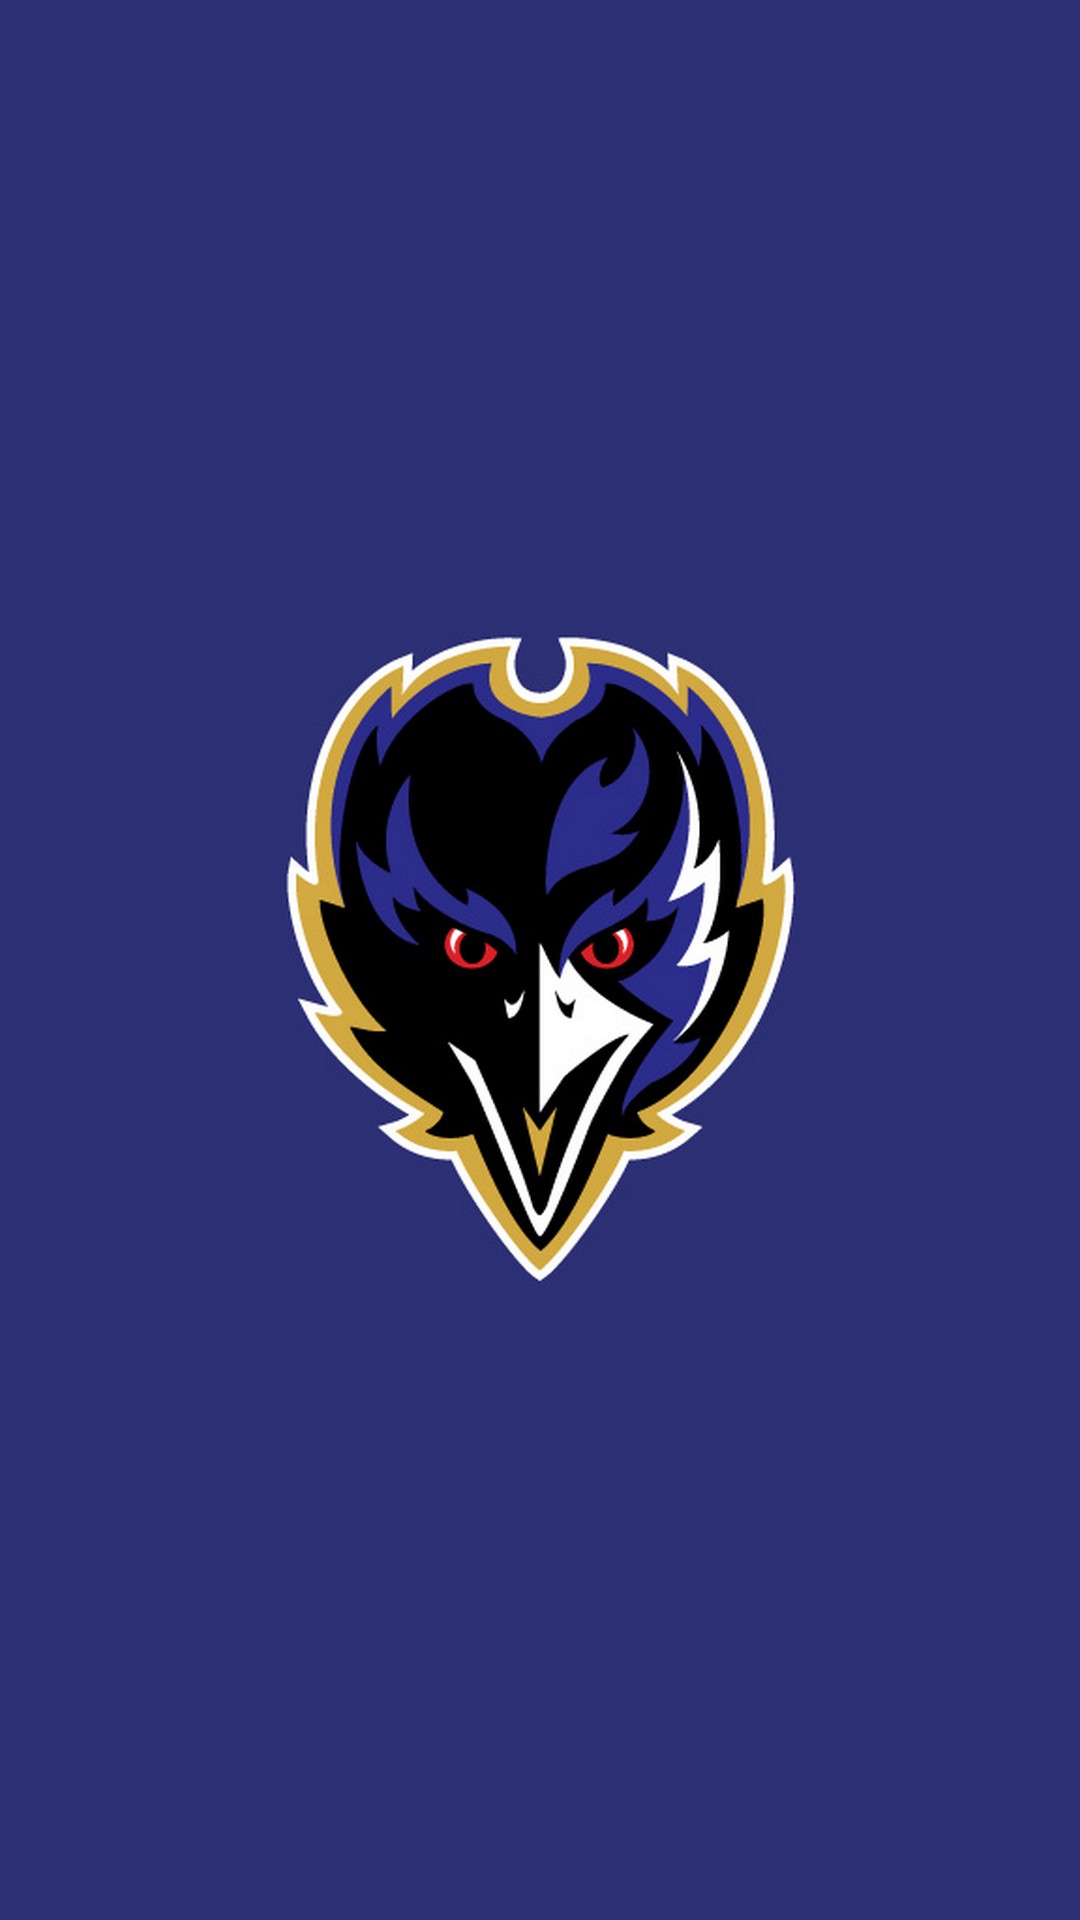 Screensaver iPhone Baltimore Ravens with high-resolution 1080x1920 pixel. Donwload and set as wallpaper for your iPhone X, iPhone XS home screen backgrounds, XS Max, XR, iPhone8 lock screen wallpaper, iPhone 7, 6, SE and other mobile devices